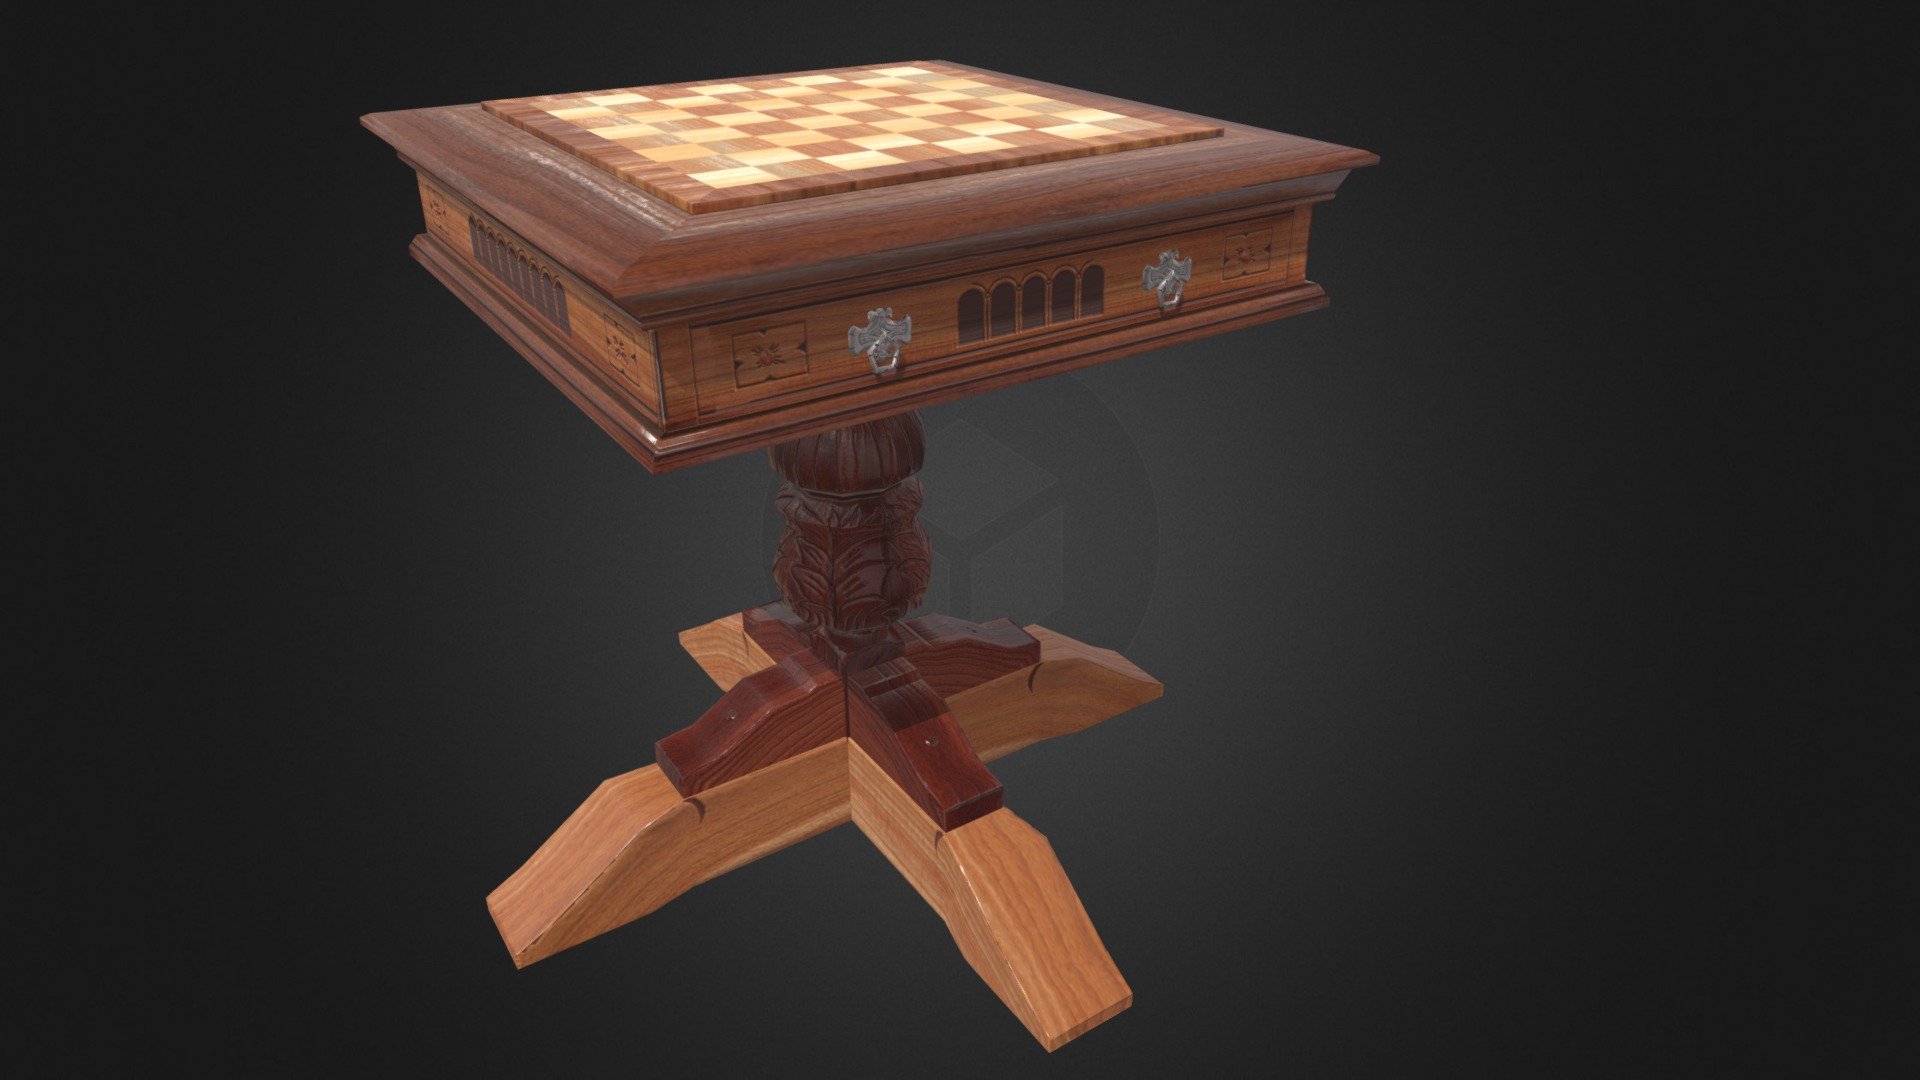 I made this chess table in a realistic style 3d model